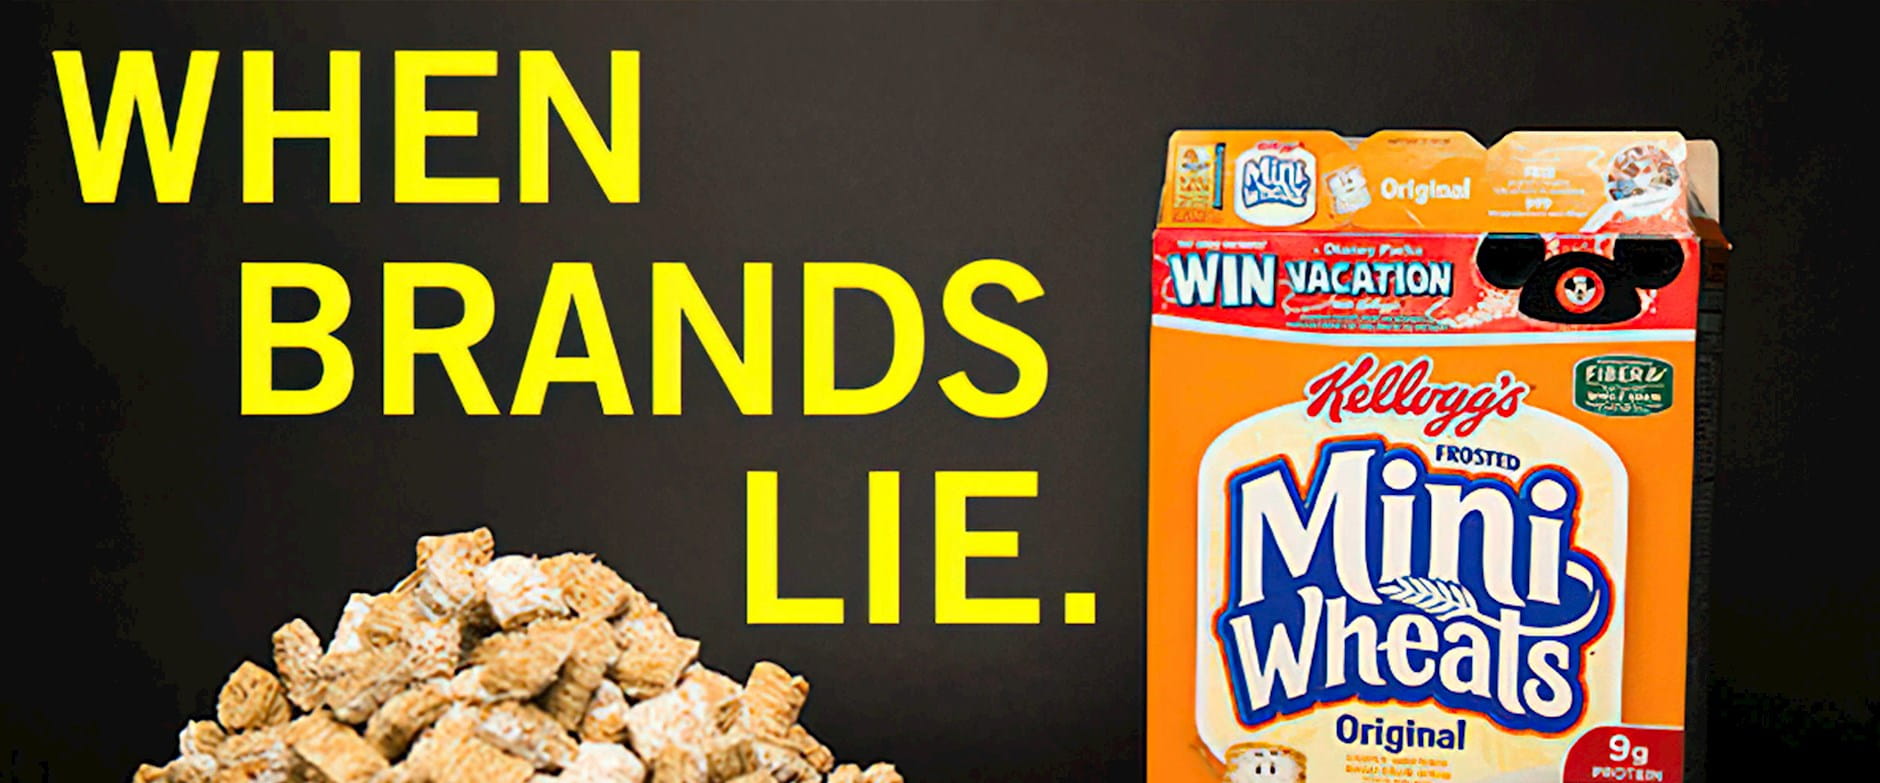 Box of Mini Wheats next to text that reads "WHEN BRANDS LIE"